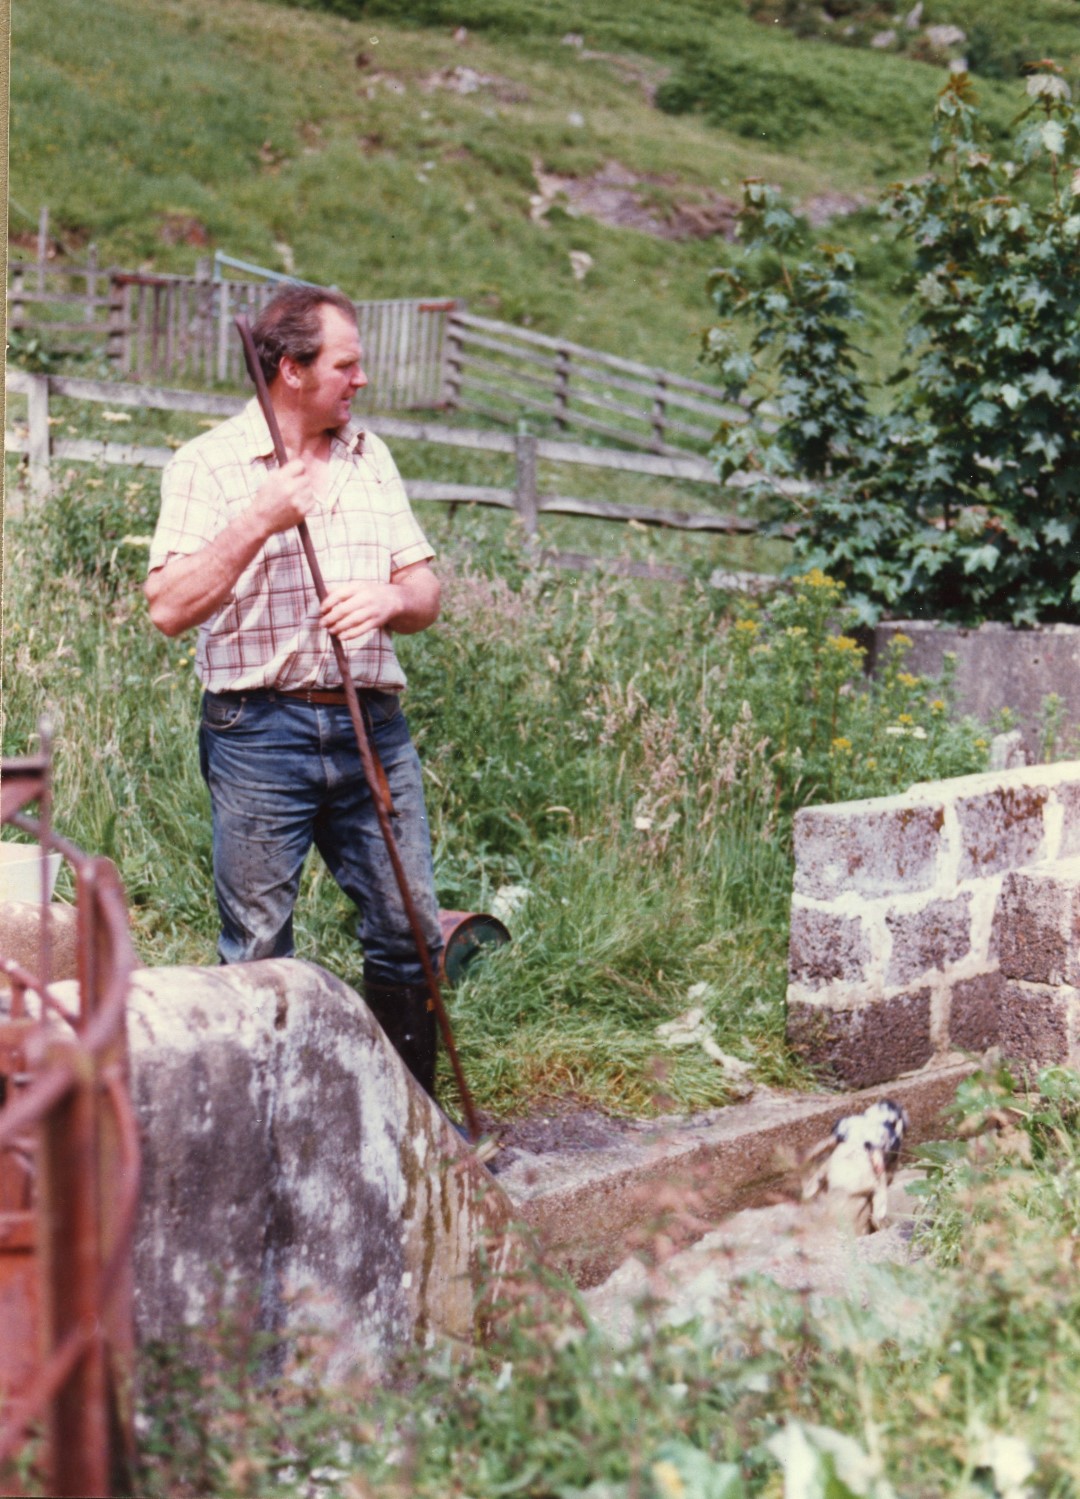 man in jeans and shirt sleeves holding a shepherds crook and looking off to the side